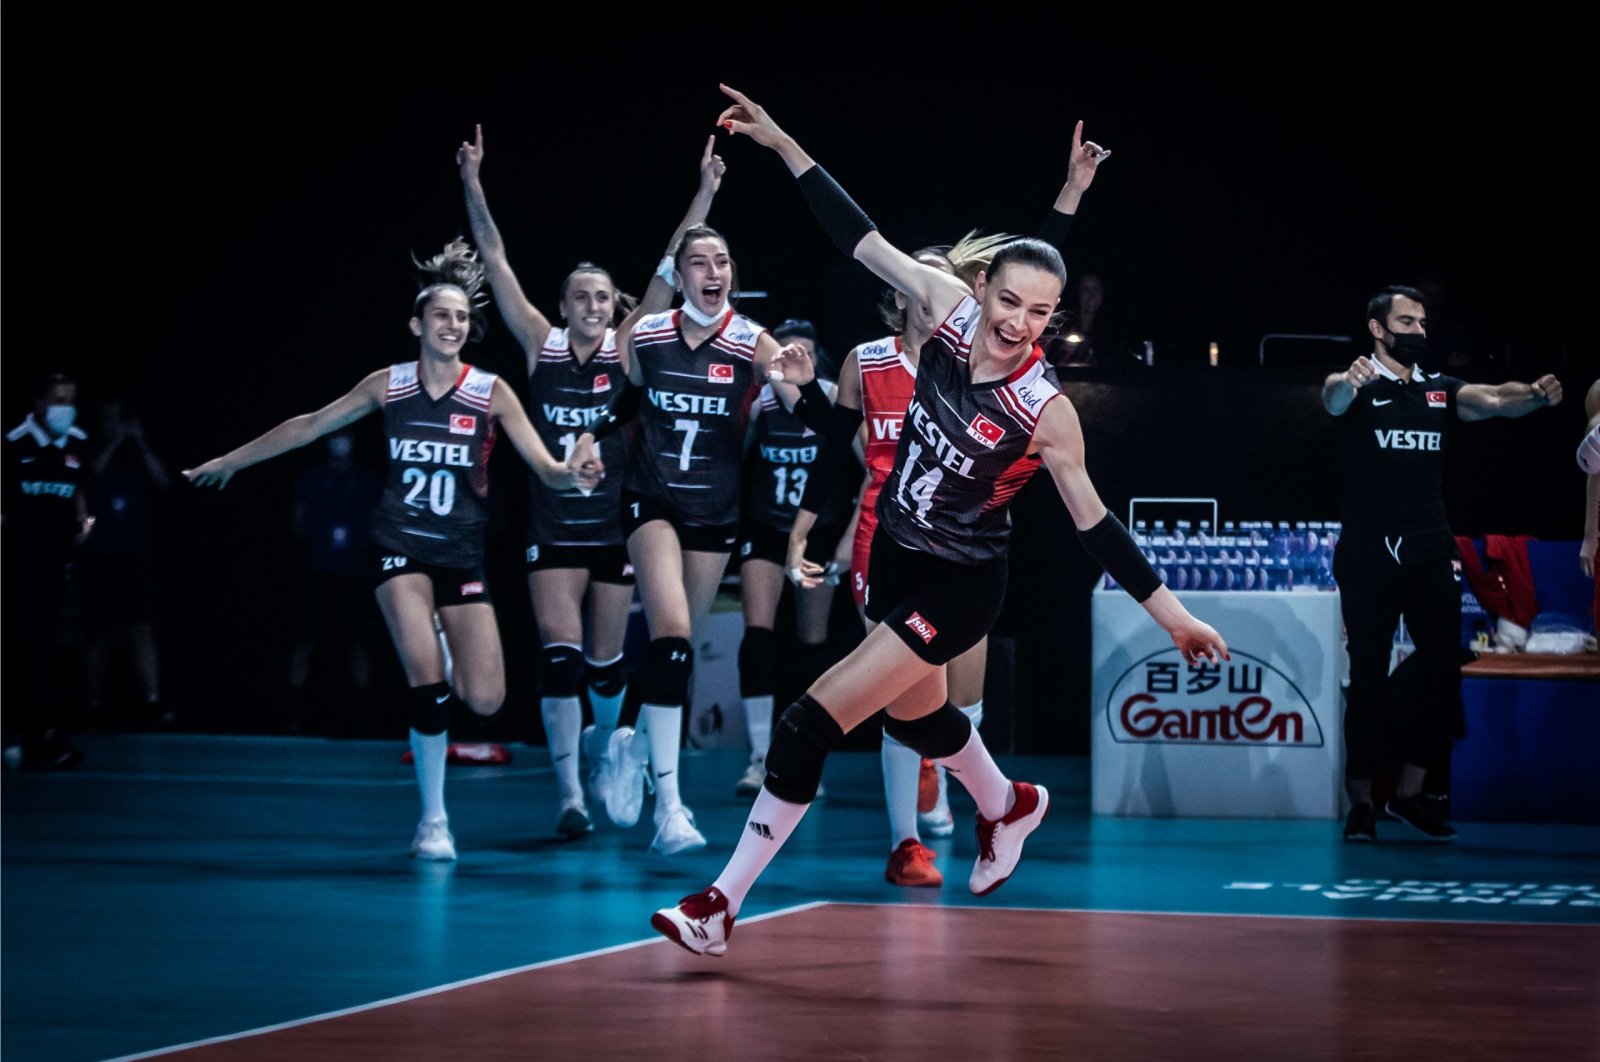 Turkish players celebrate after winning the bronze medal in the Volleyball Women's Nations League, Rimini, Italy, June 25, 2021. (DHA Photo)